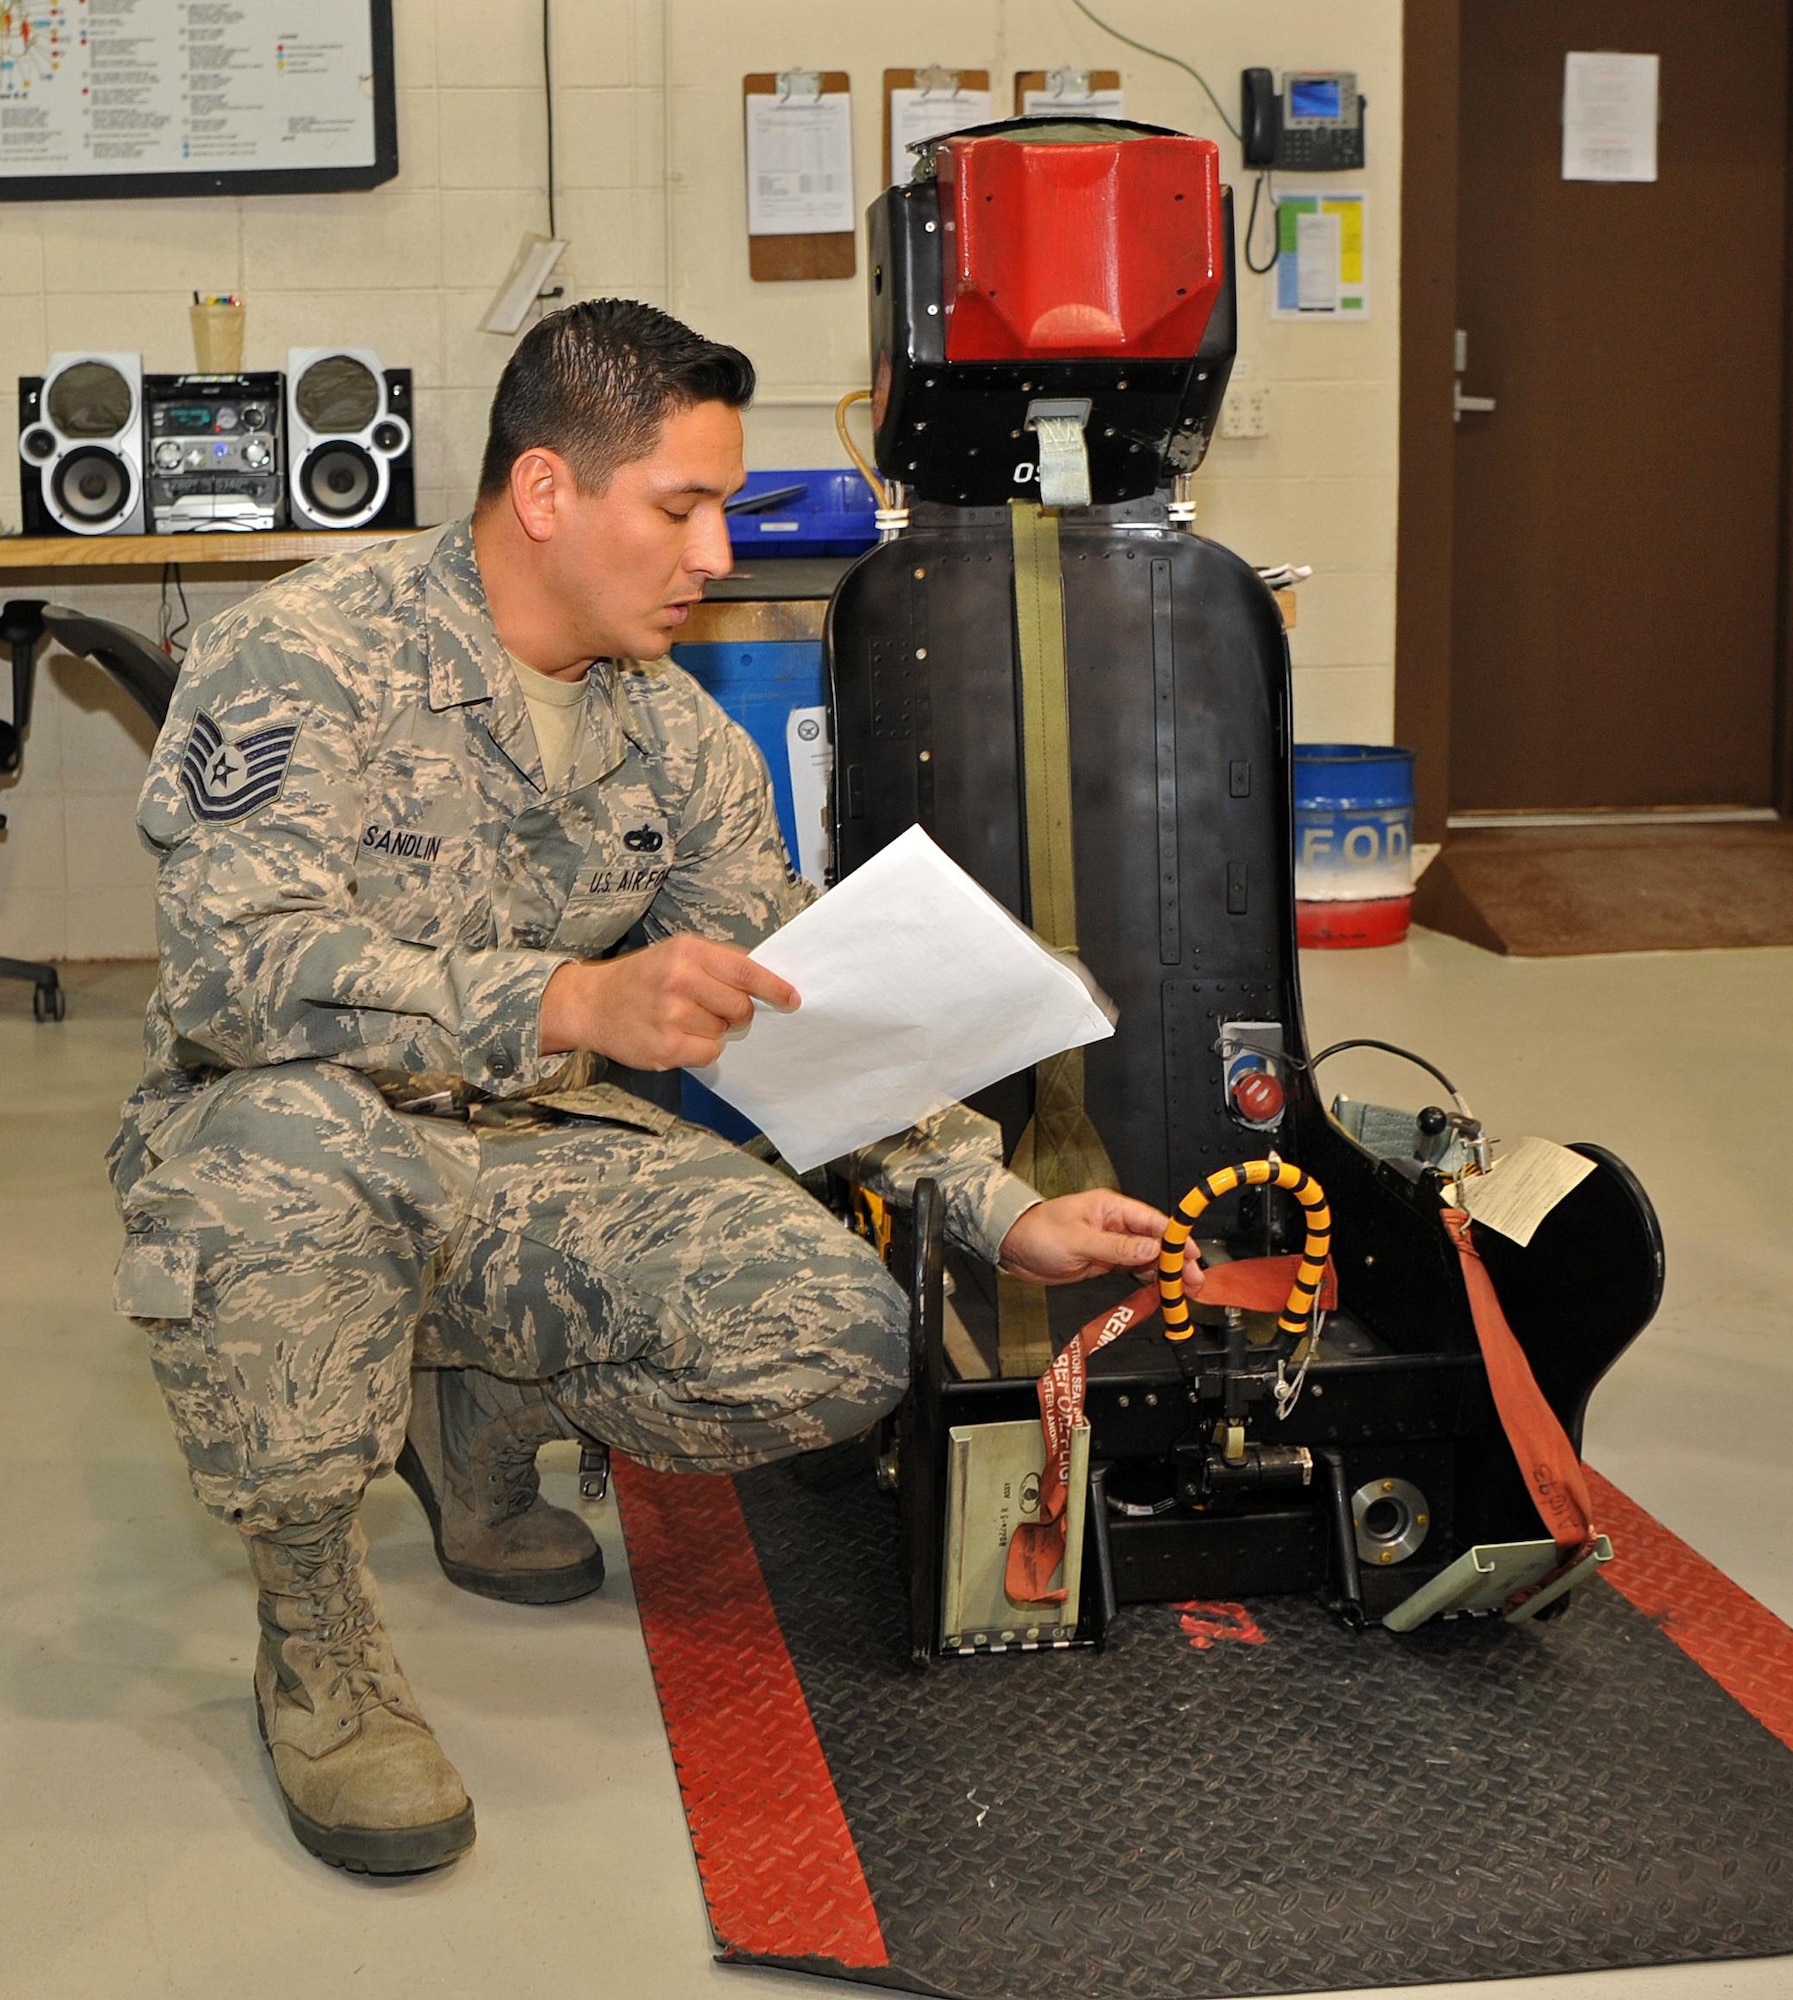 Tech. Sgt. Jonathan Sandlin, 9th Maintenance Squadron assistant section chief, reviews a checklist while inspecting a U-2 Dragon Lady ejection seat Jan. 23, 2017 at Beale Air Force Base, Calif. The ejection seat allows a pilot to quickly escape an aircraft in the event of an emergency. (U.S. Air Force photo/Airman 1st Class Tristan D. Viglianco)